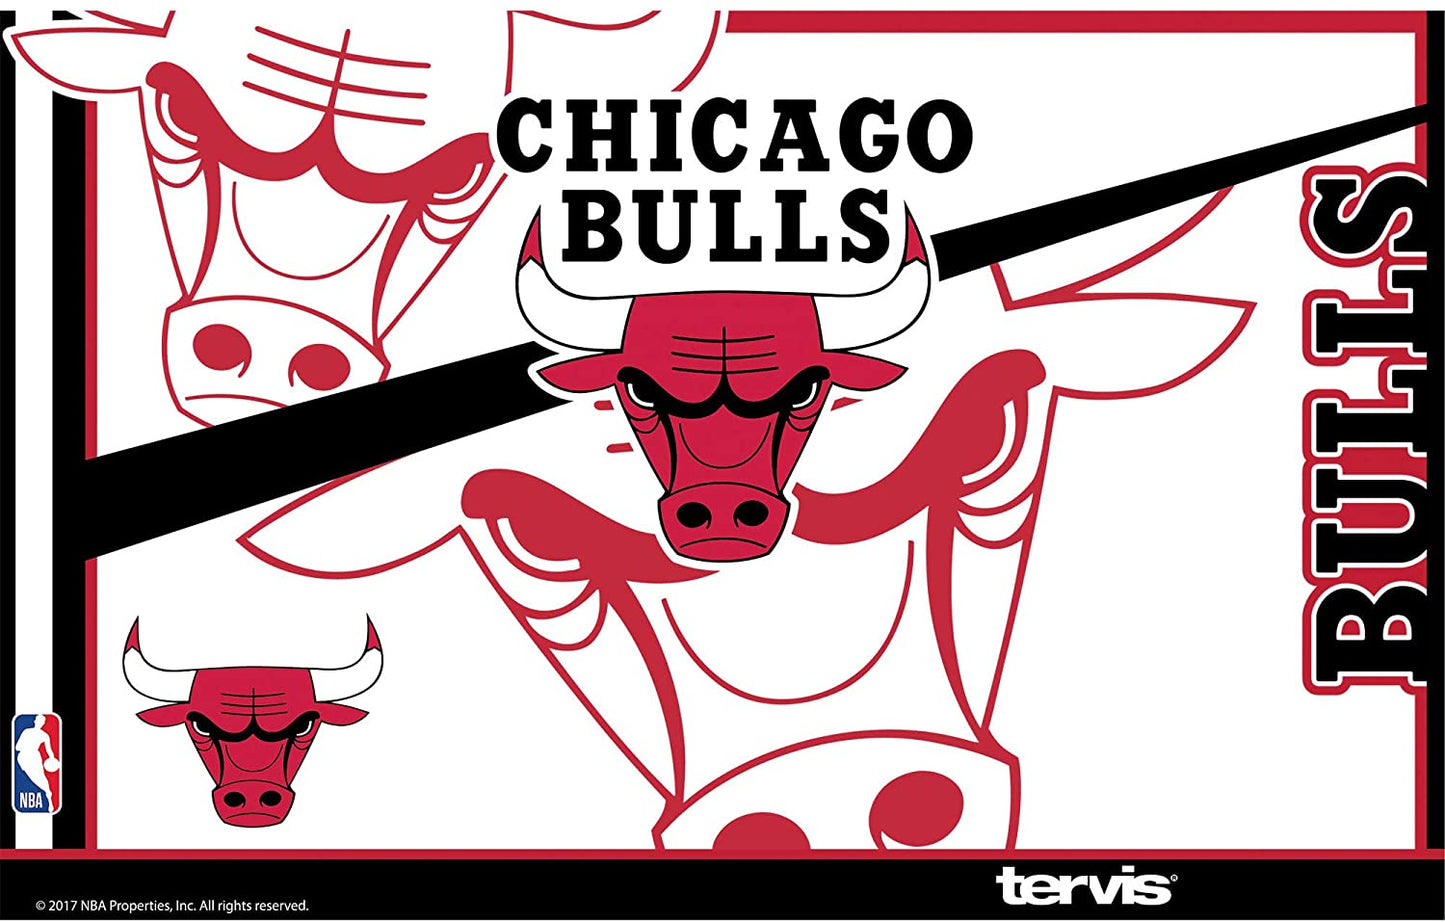 Chicago Bulls™ Paint 20 oz. Stainless Steel Tumbler By Tervis